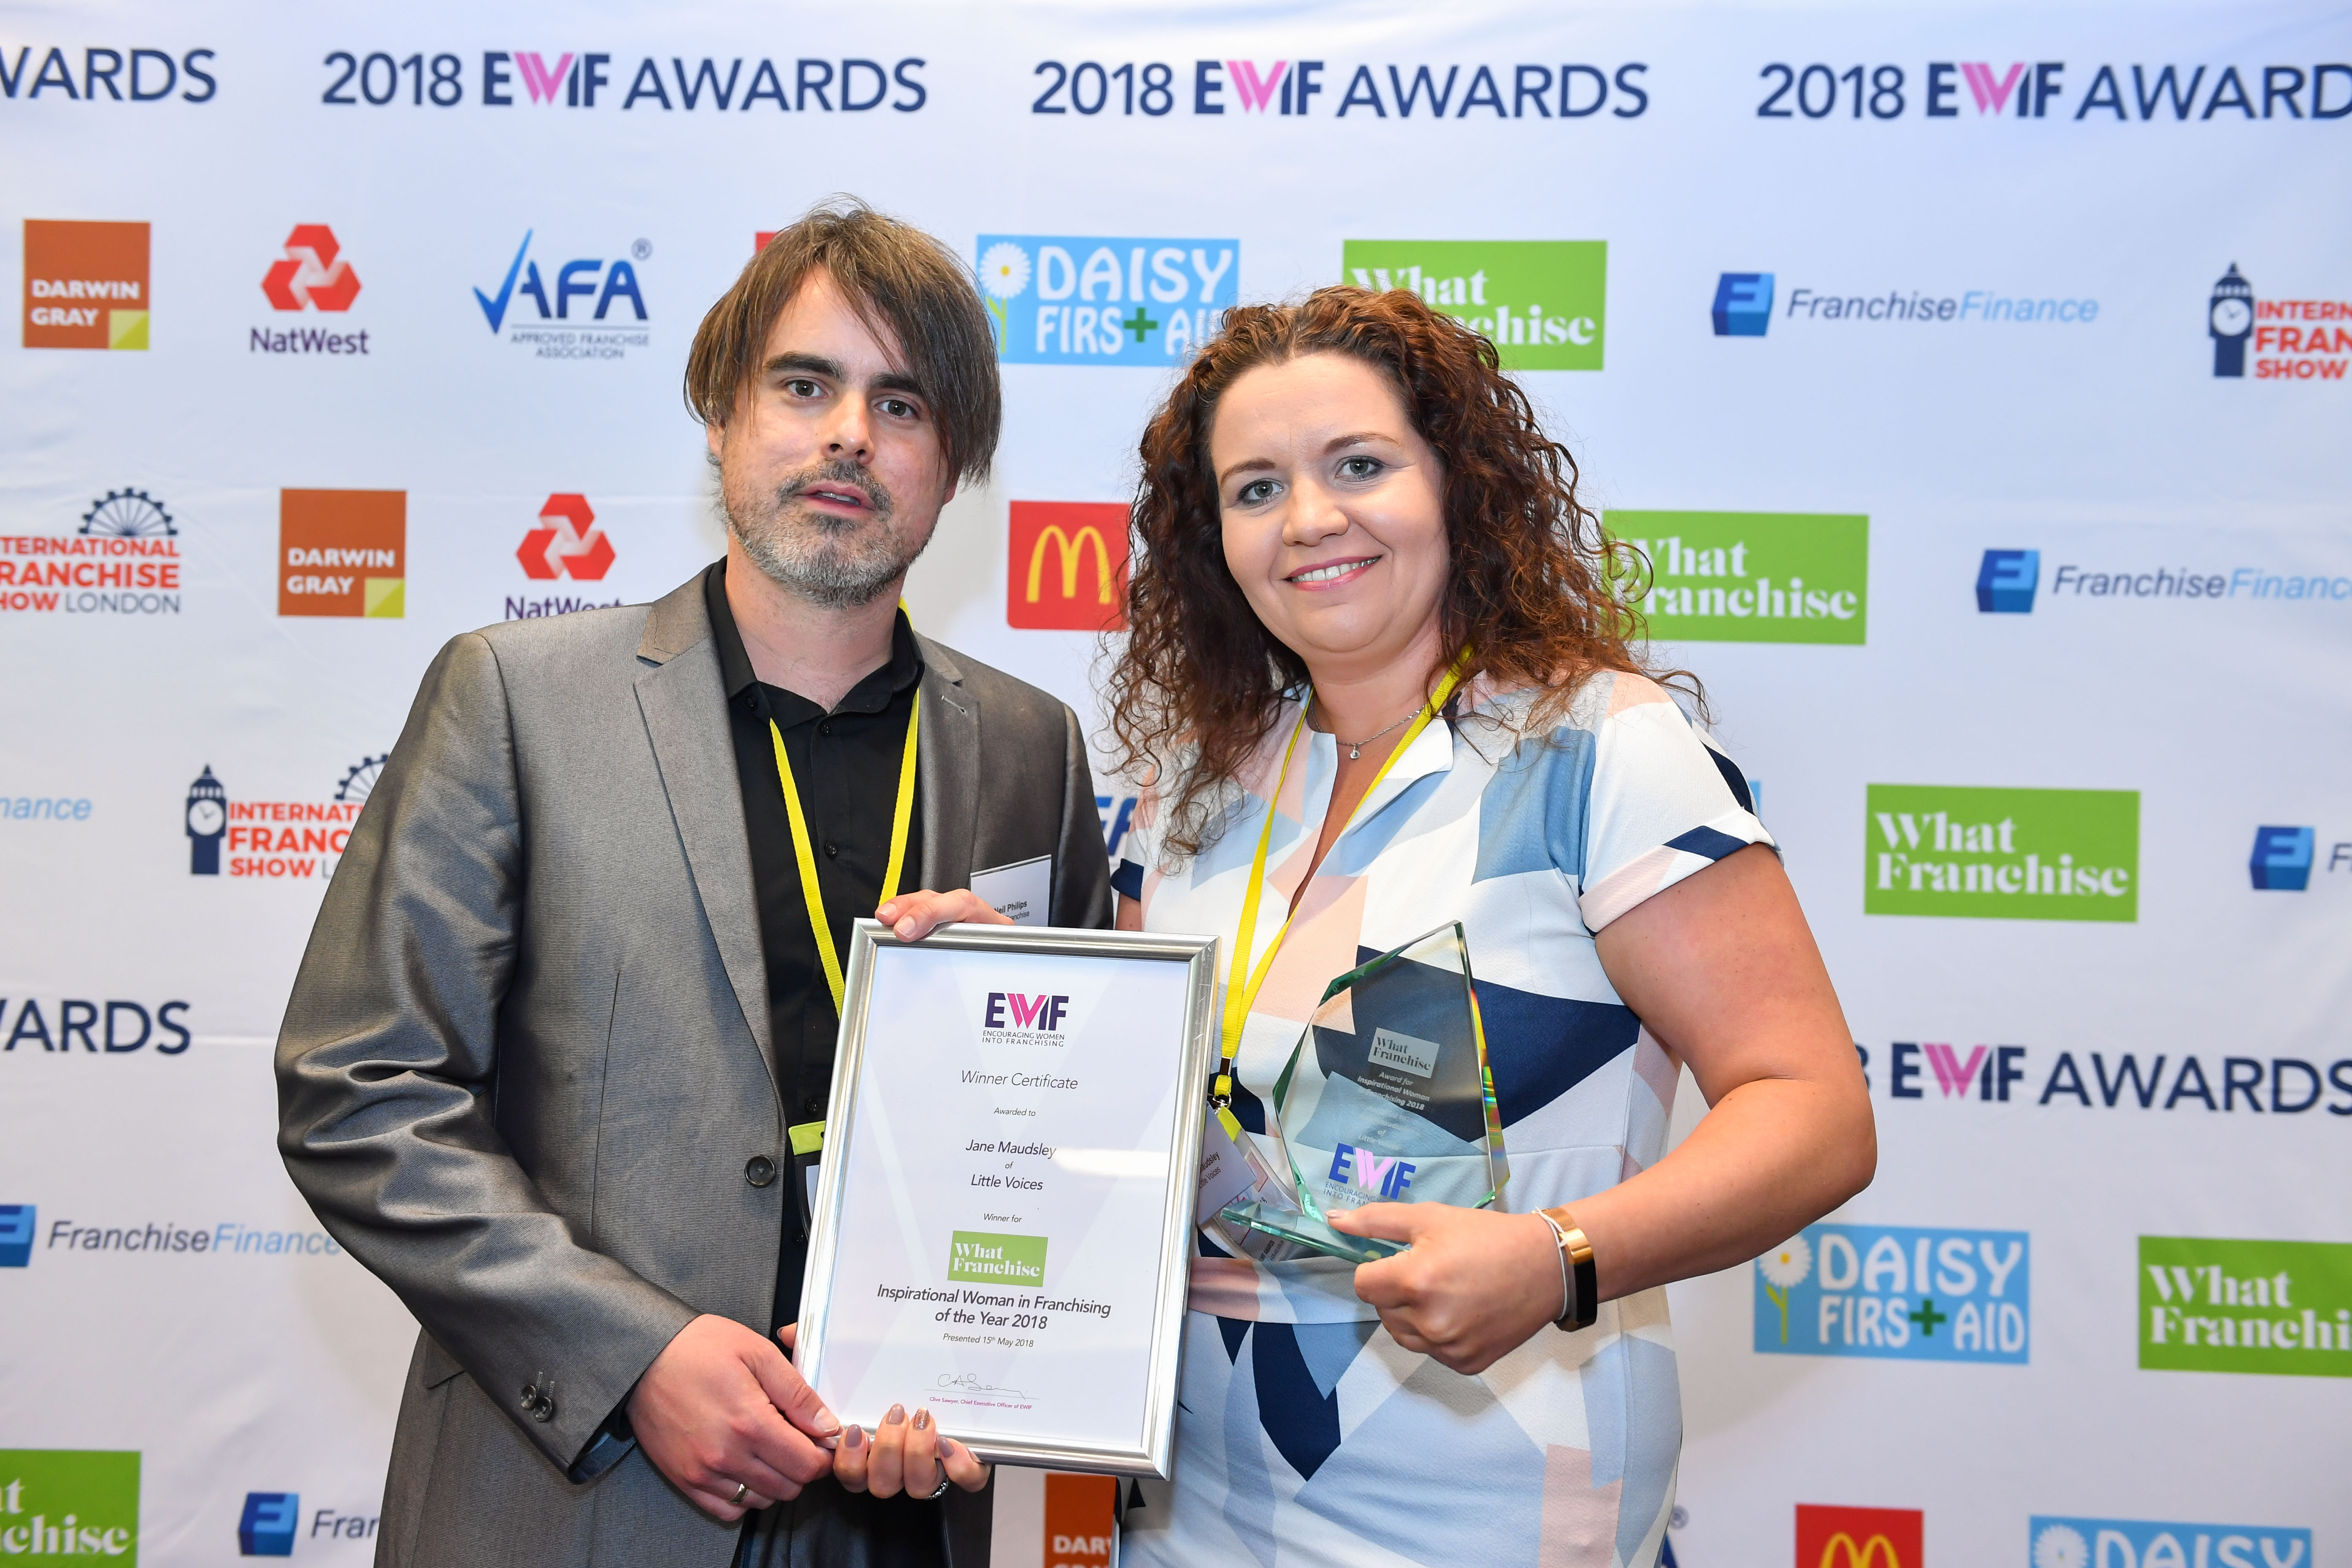 Jo Middleton, Dog First Aid – New Woman Franchisor of the Year 2018